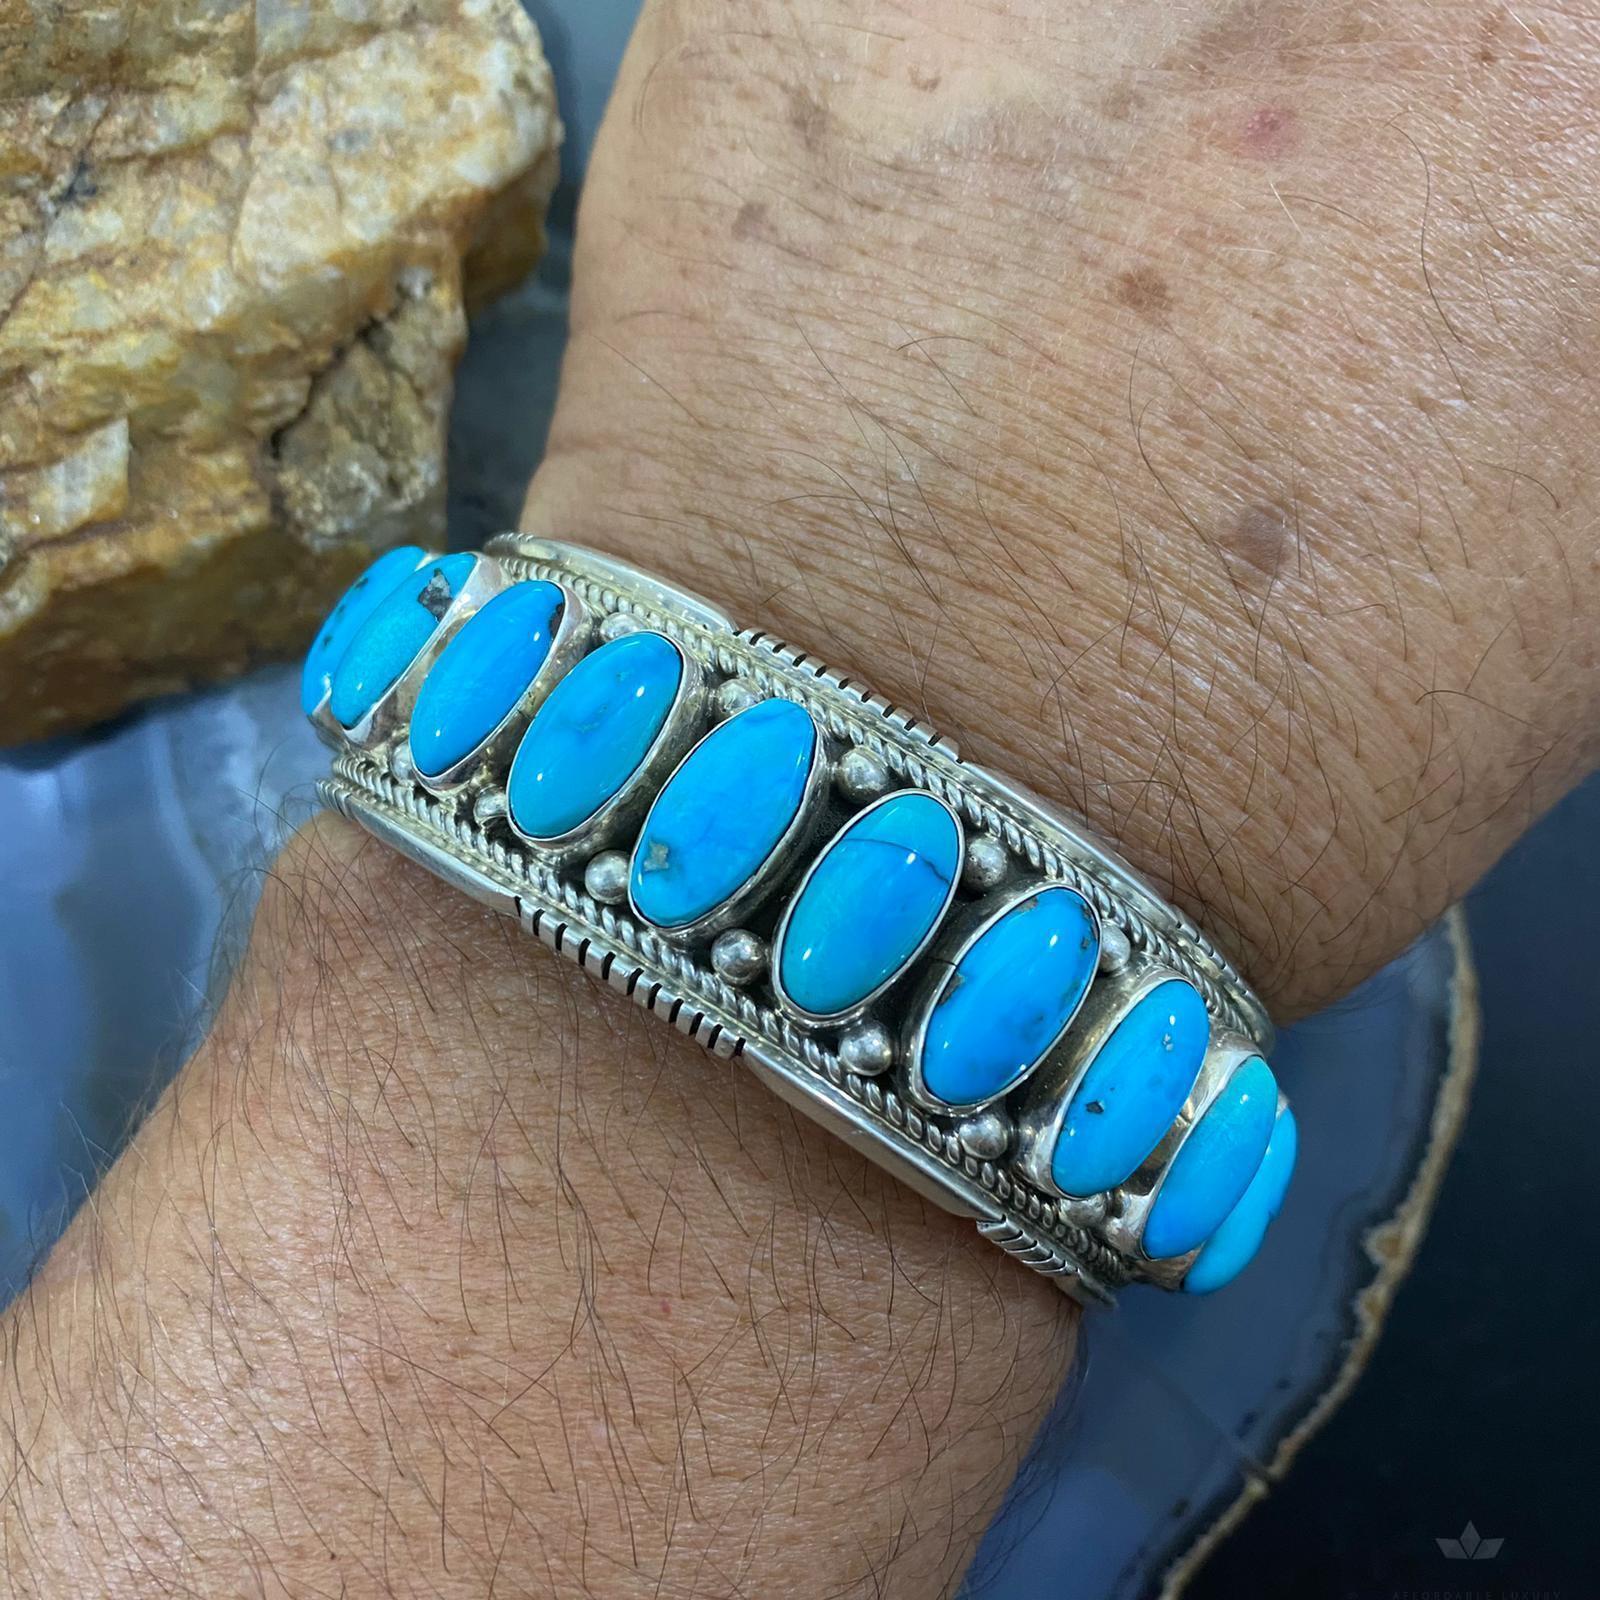 Lot  Albert Cleveland Navajo Indian signed GIANT vintage Native American  sterling silver and turquoise Masterpiece cuff bracelet with stamped eagle  Thunderbird design and applied detailing 2 34W x 2 34Inner diam